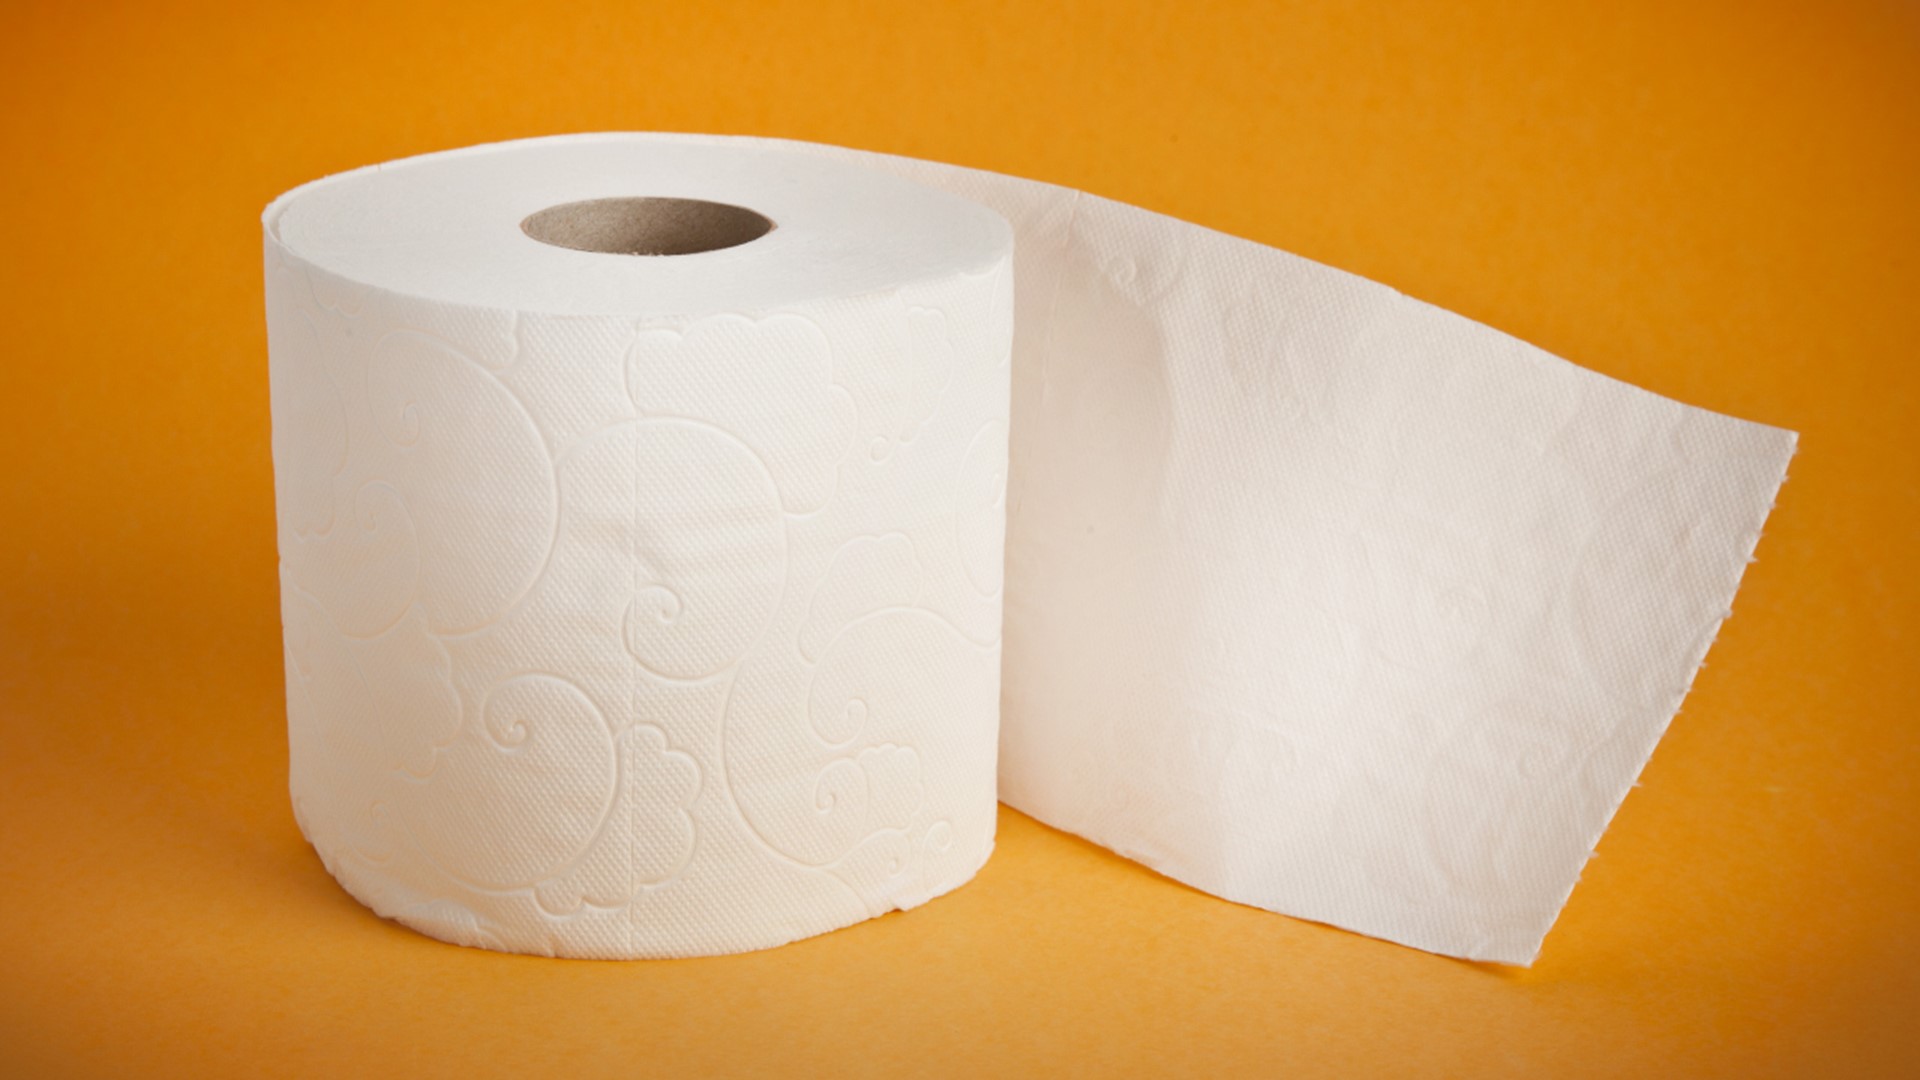 The average person already has 500% more toilet paper than they actually need for quarantine. Digital journalist Lexi Hazlett shares how the calculator works.